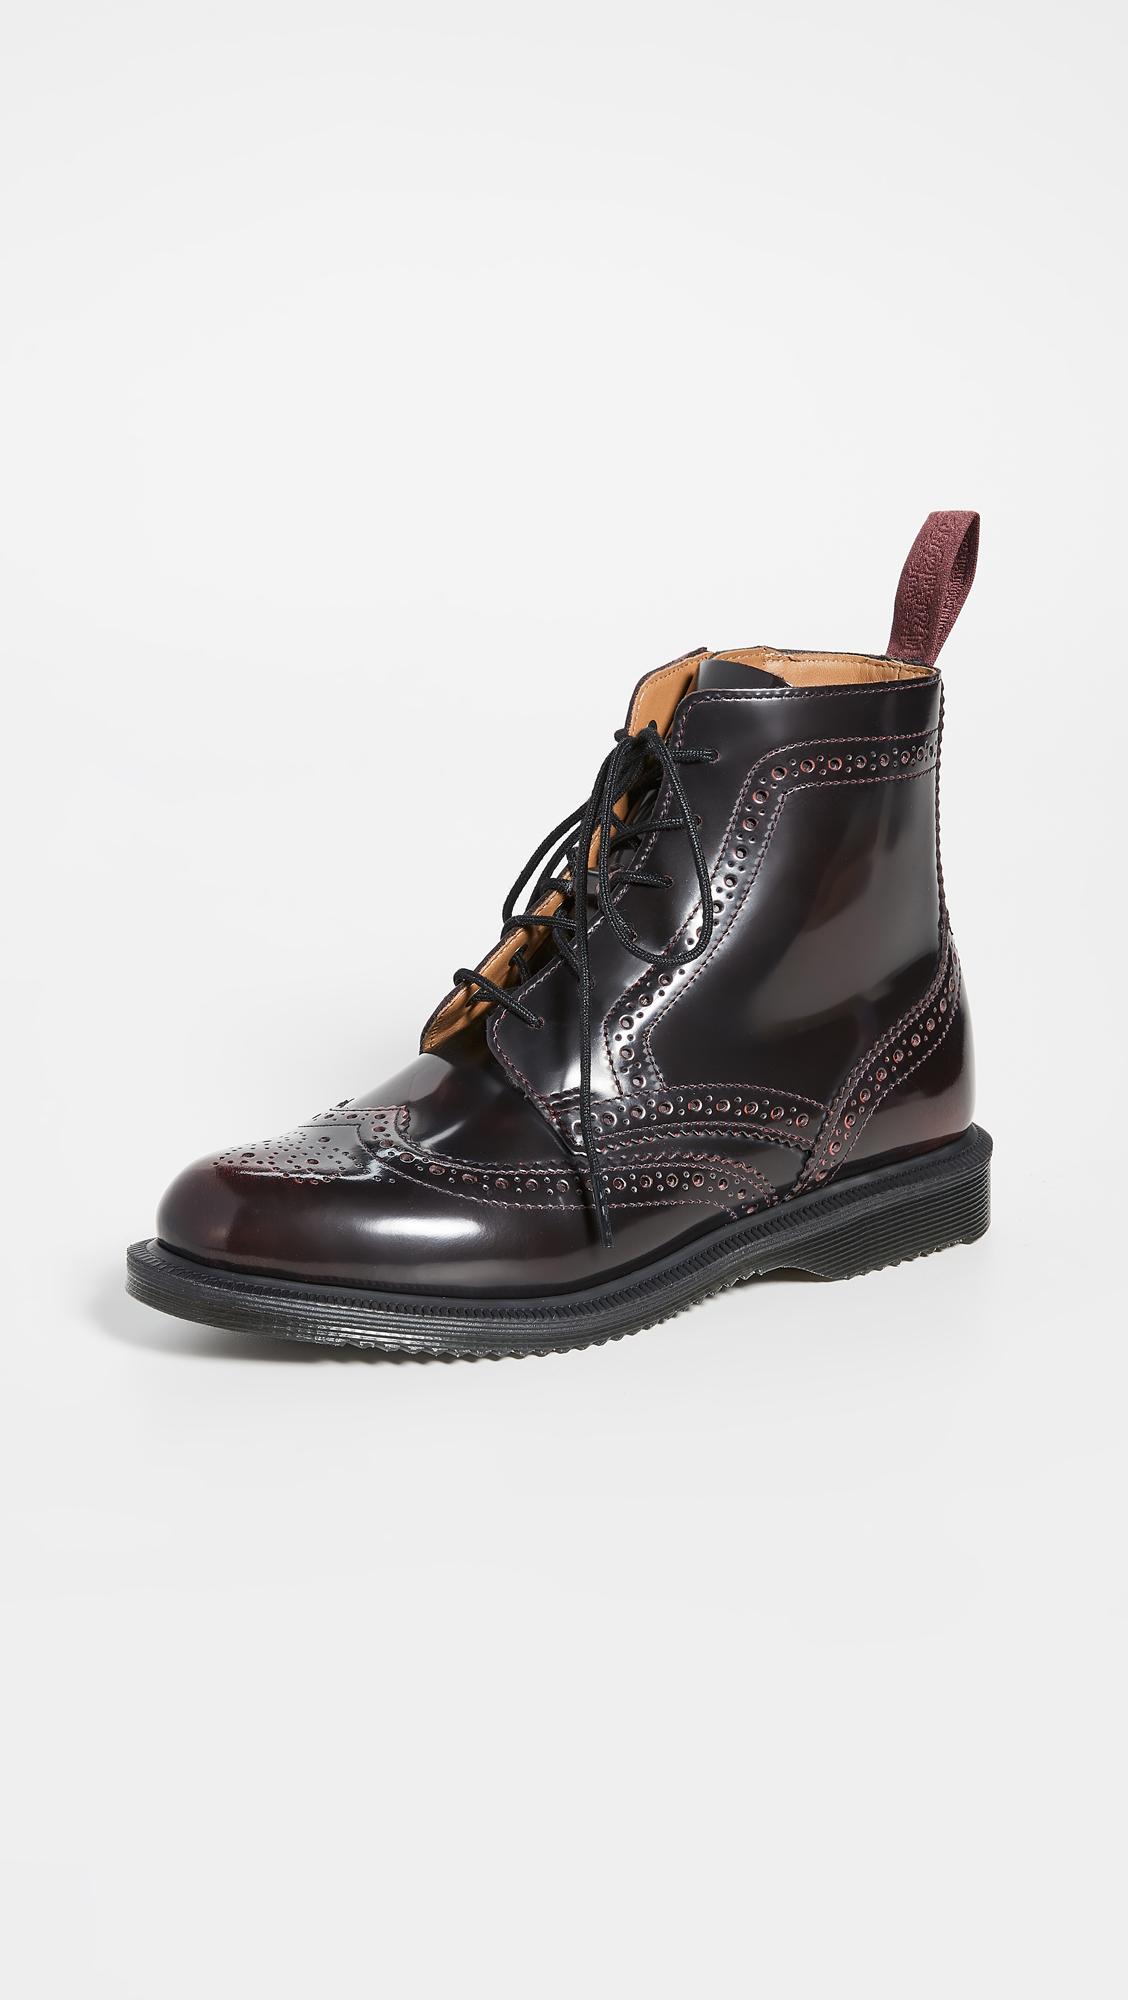 Dr. Martens Delphine 6 Eye Brogue Boots in Black | Lyst Canada